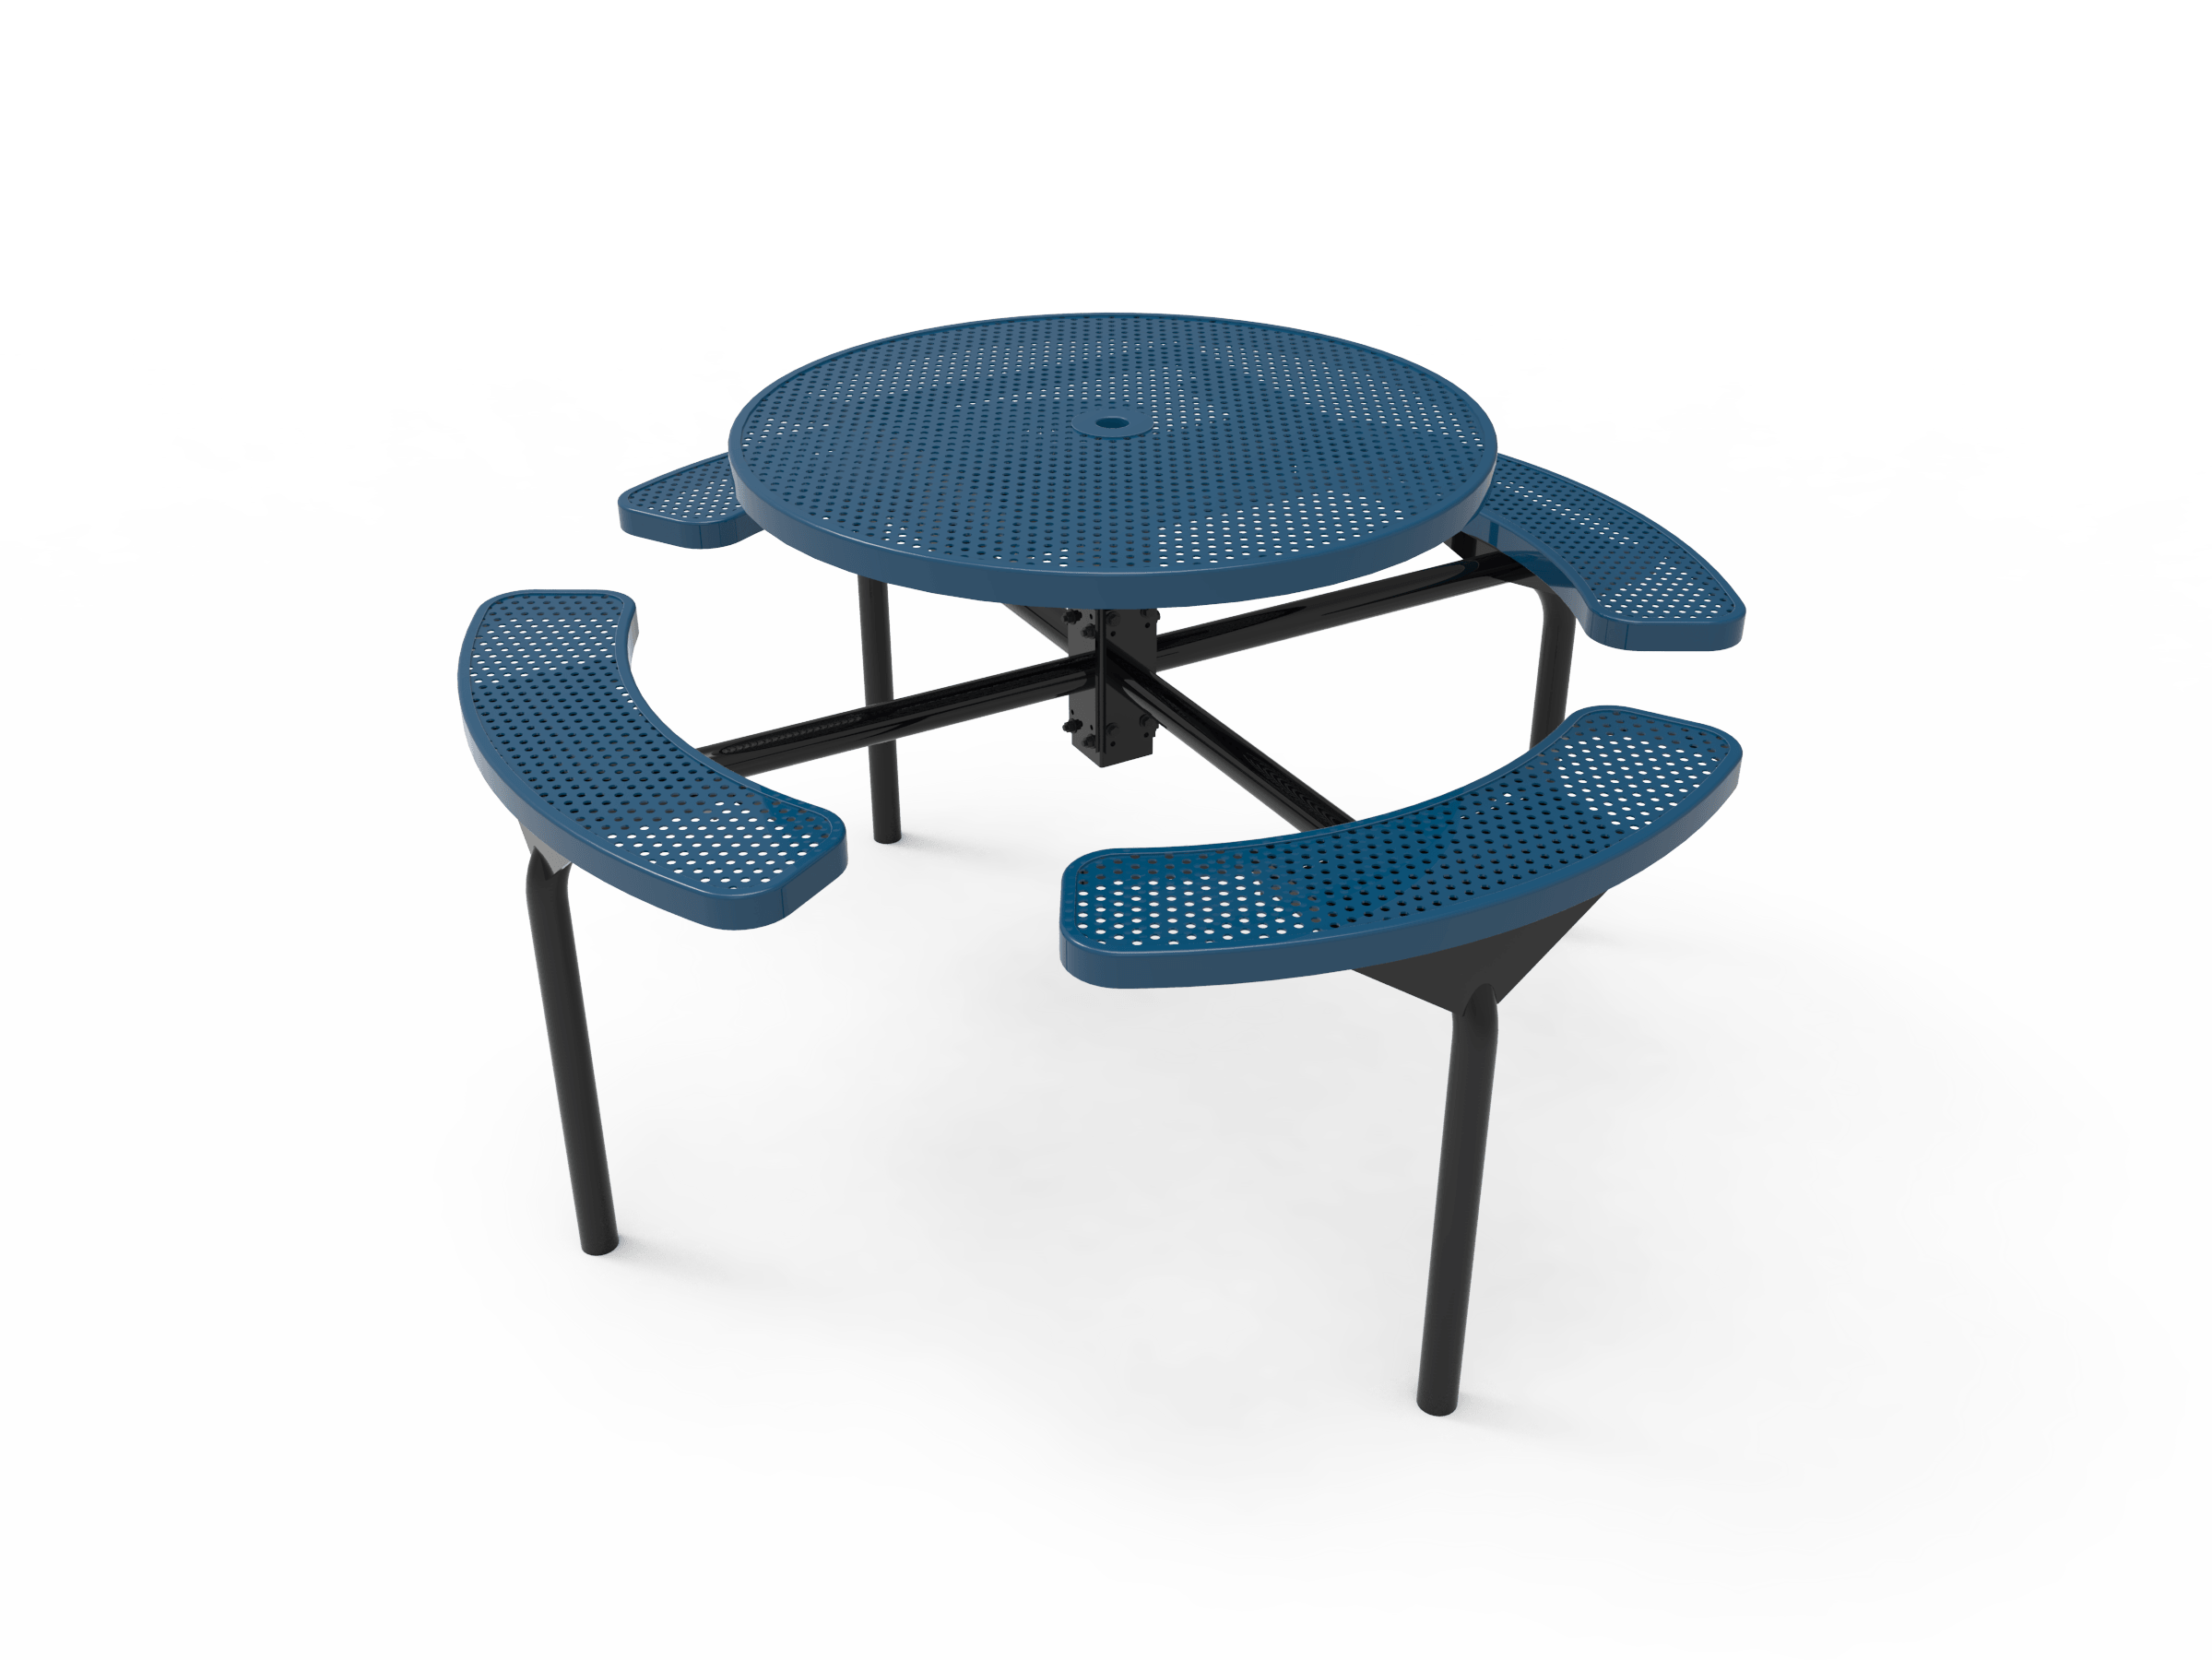 46″ Round Nexus In Ground Table With 4 Seats-Punched
TRD46-D-47-000
Industry Standard Finish
$1669.00
TRD46-B-47-000
Advantage Premium Finish
$2089.00
